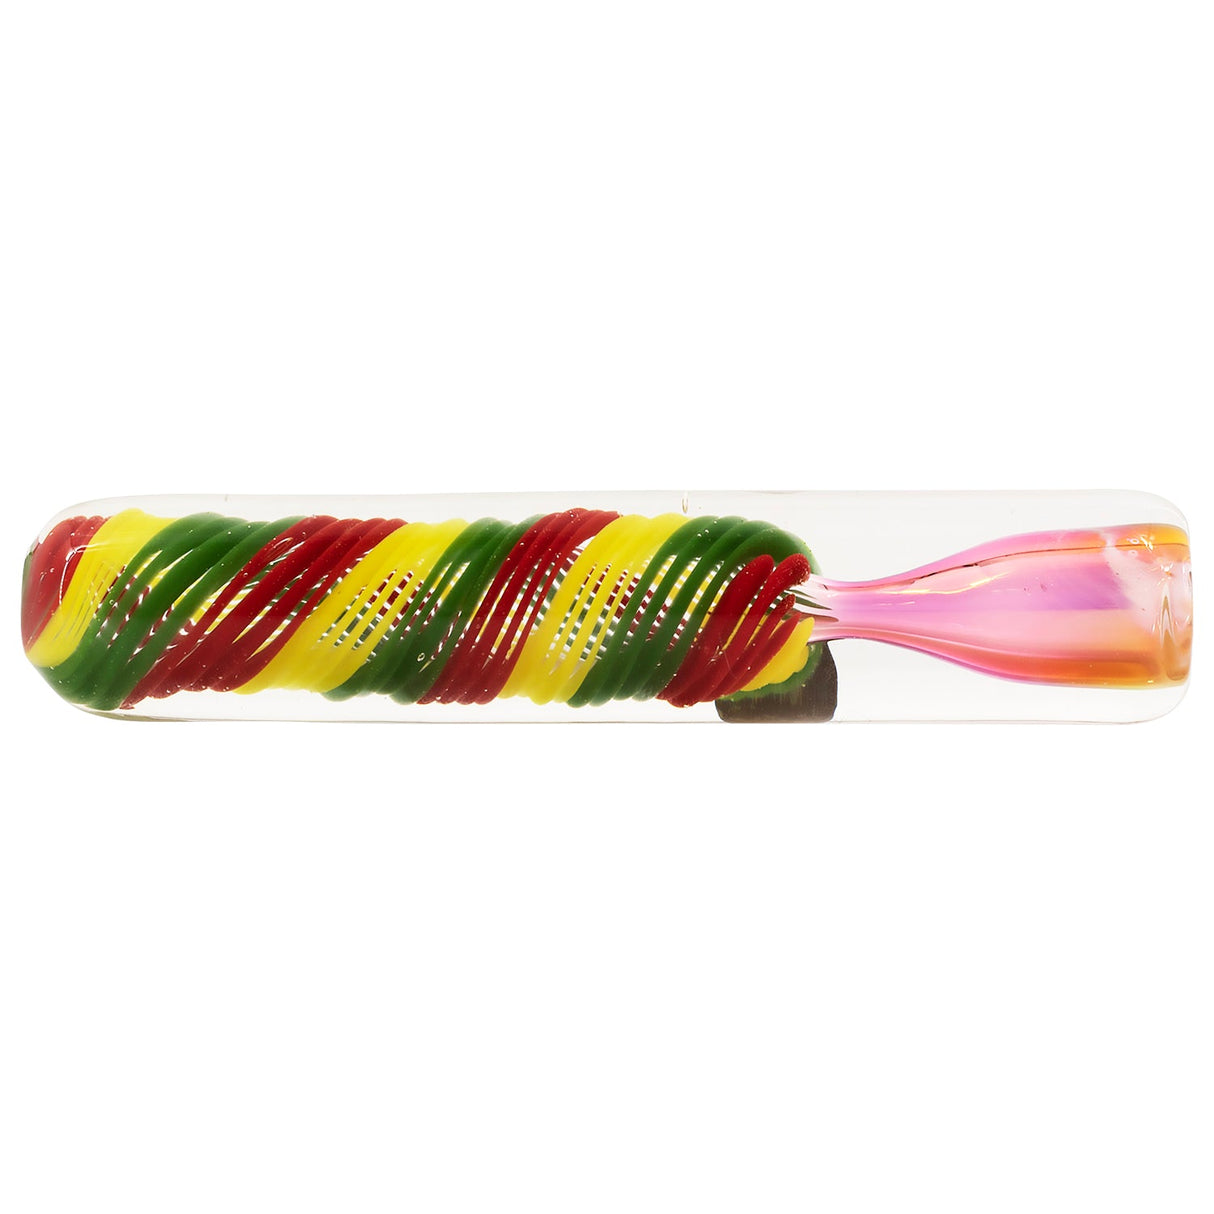 LA Pipes Rasta Twister Chillum Pipe in Borosilicate Glass, Fumed Color Changing Design, 3.25" Length, USA Made